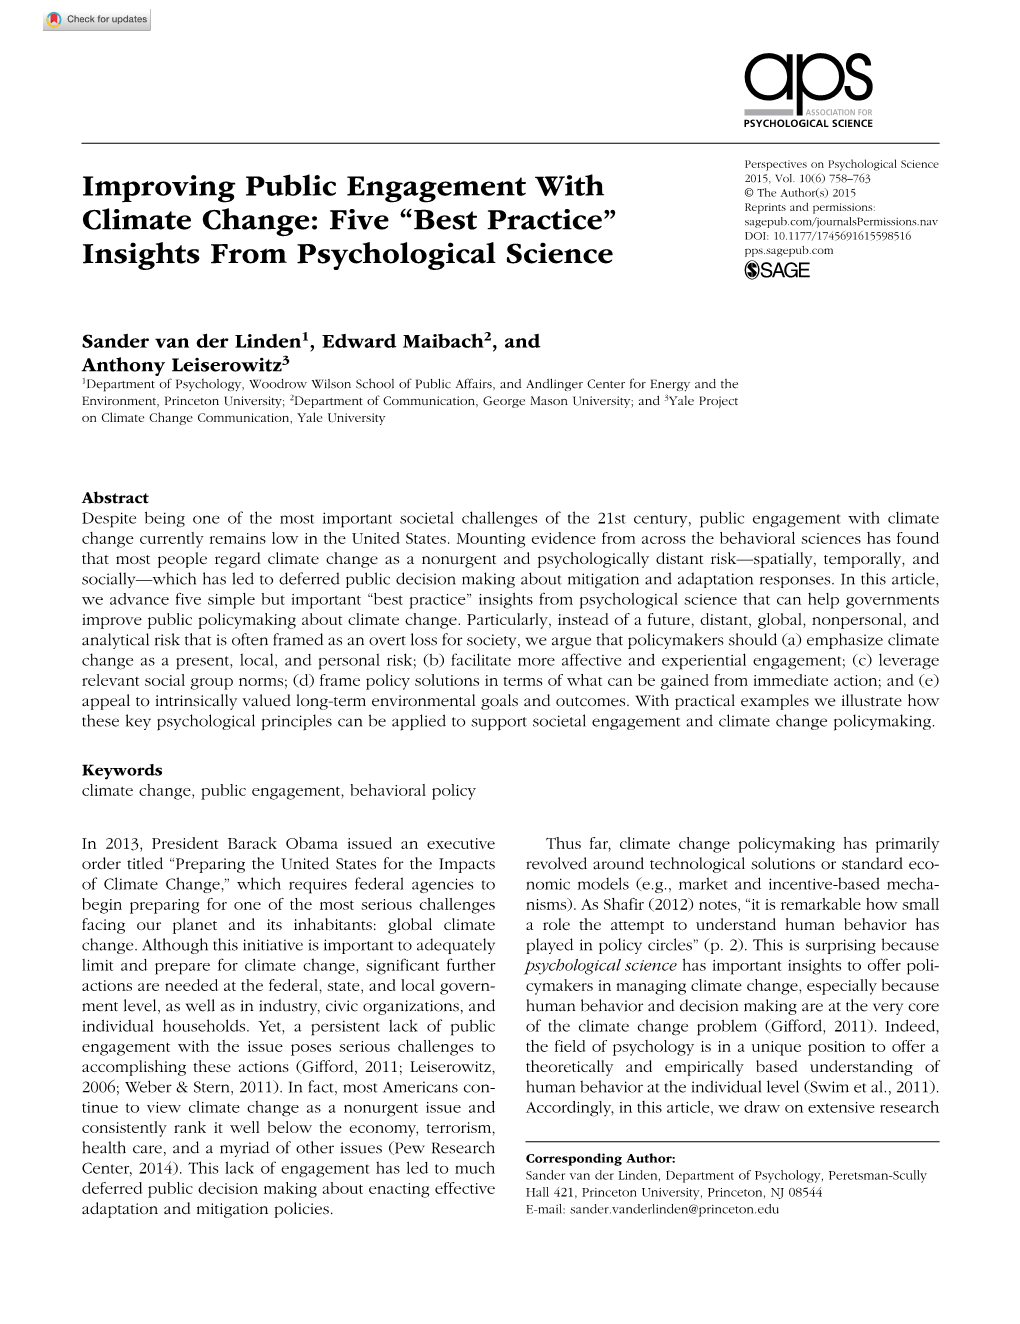 Improving Public Engagement with Climate Change Research-Article5985162015